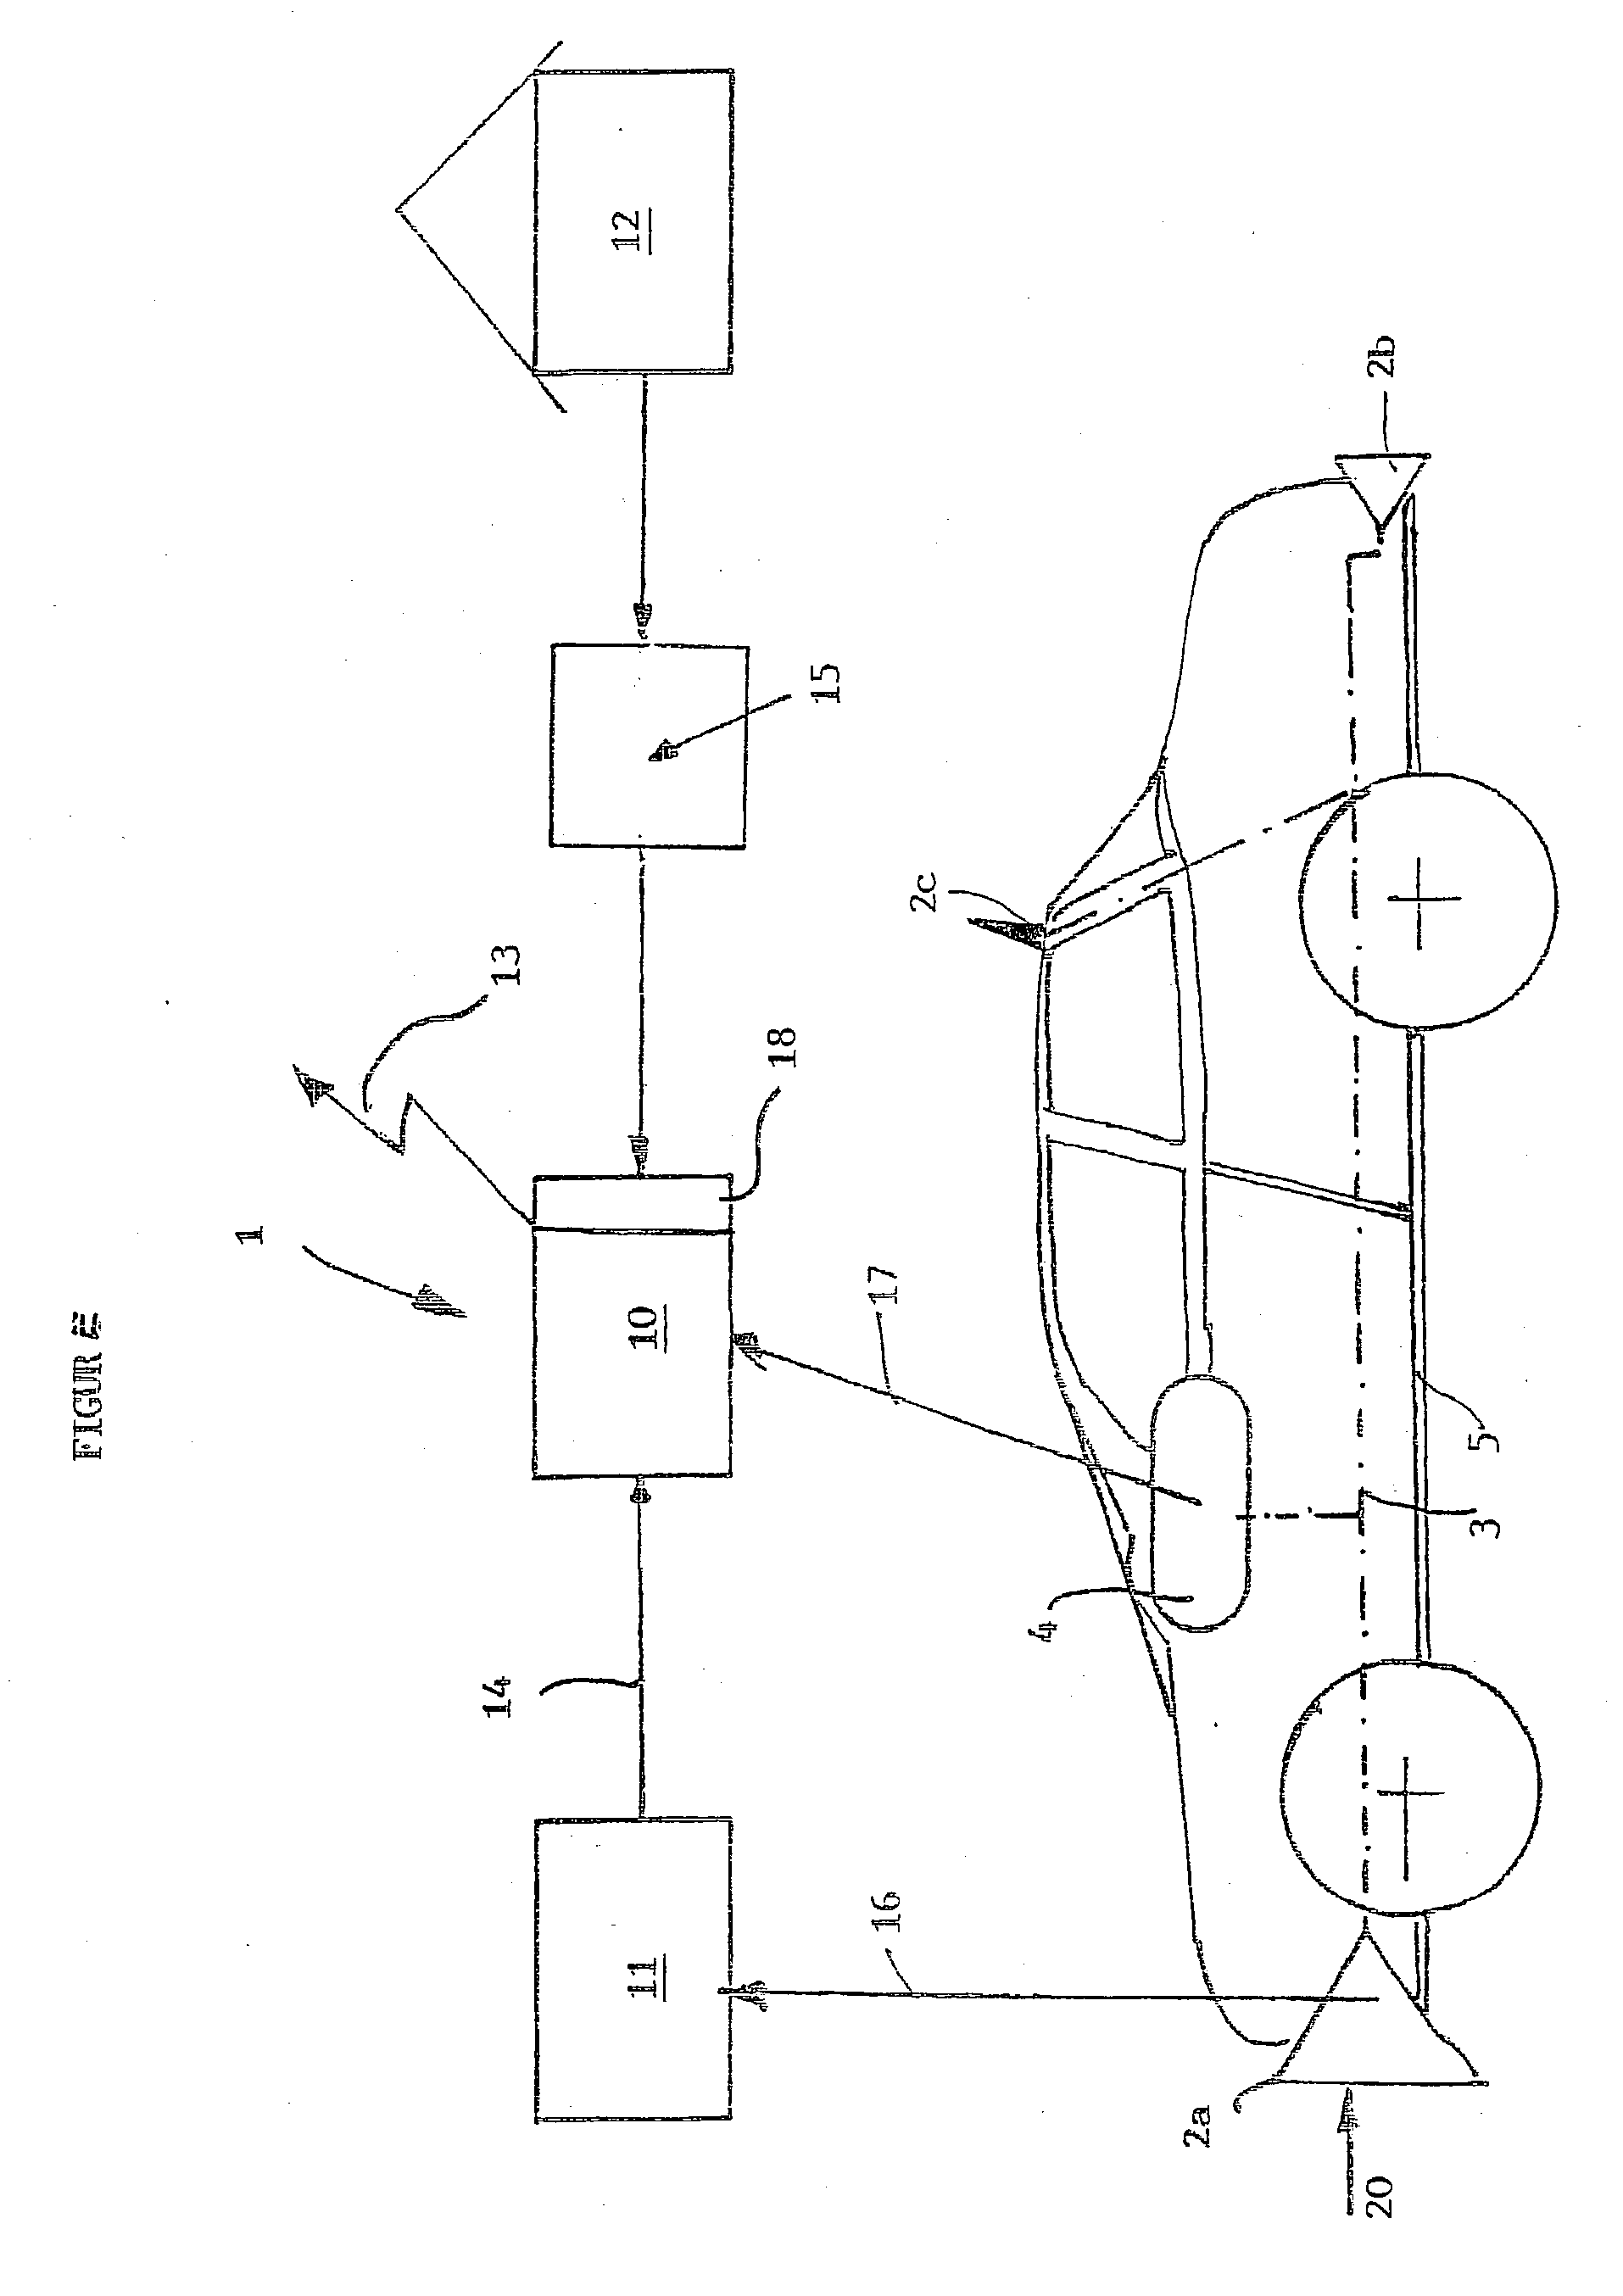 Method and device for diagnosing in a motor vehicle a driver's fitness drive